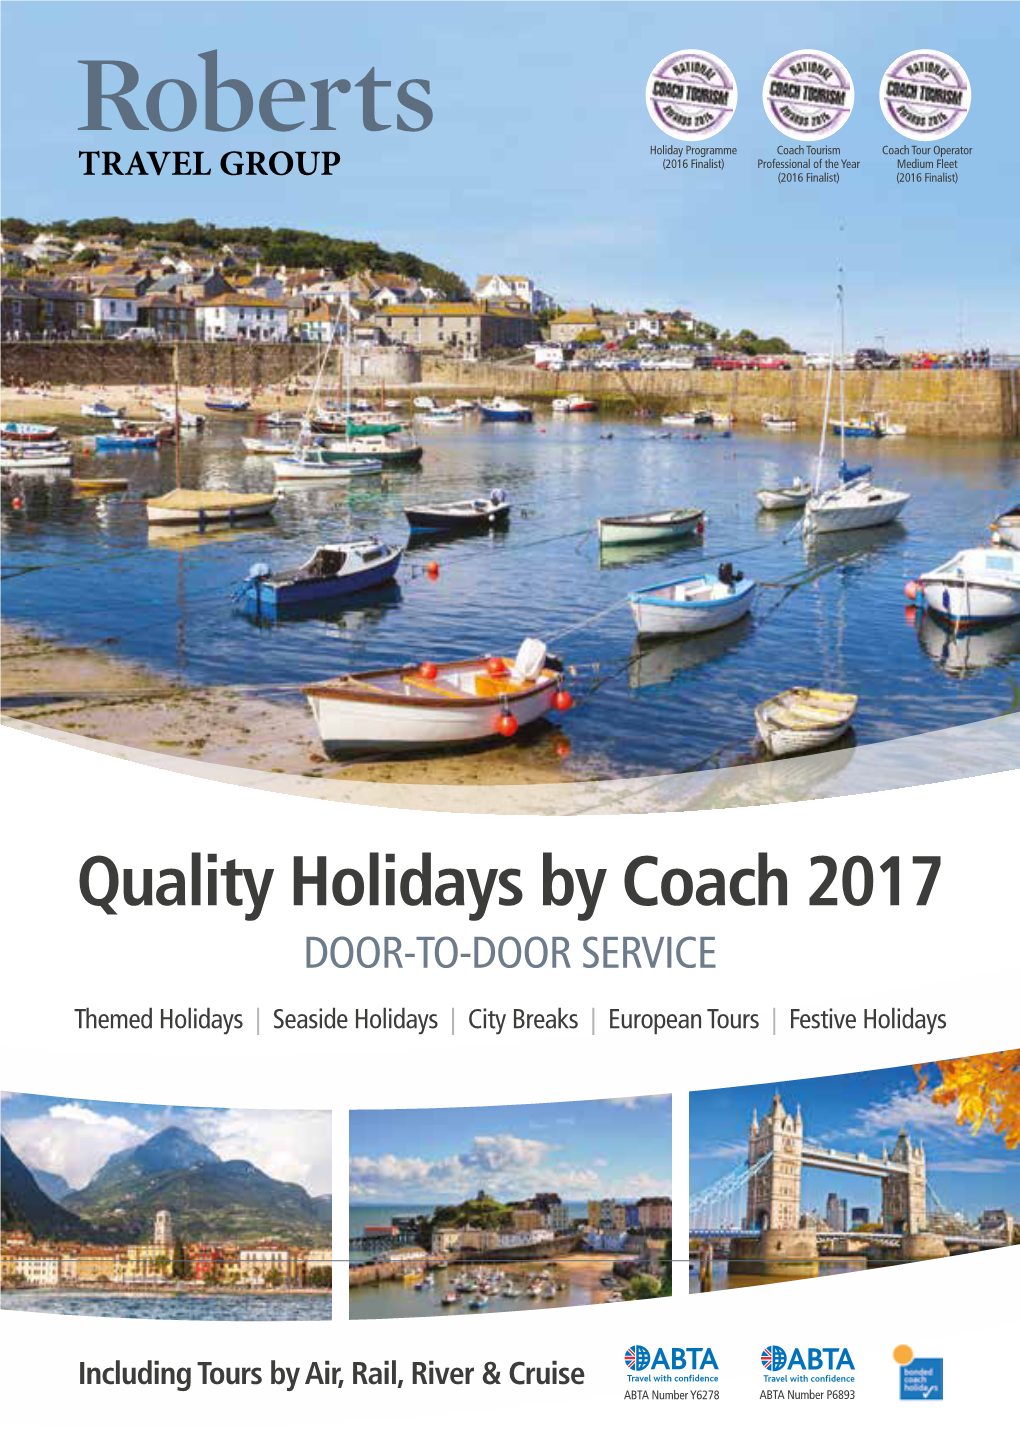 Quality Holidays by Coach 2017 DOOR-TO-DOOR SERVICE Themed Holidays | Seaside Holidays | City Breaks | European Tours | Festive Holidays